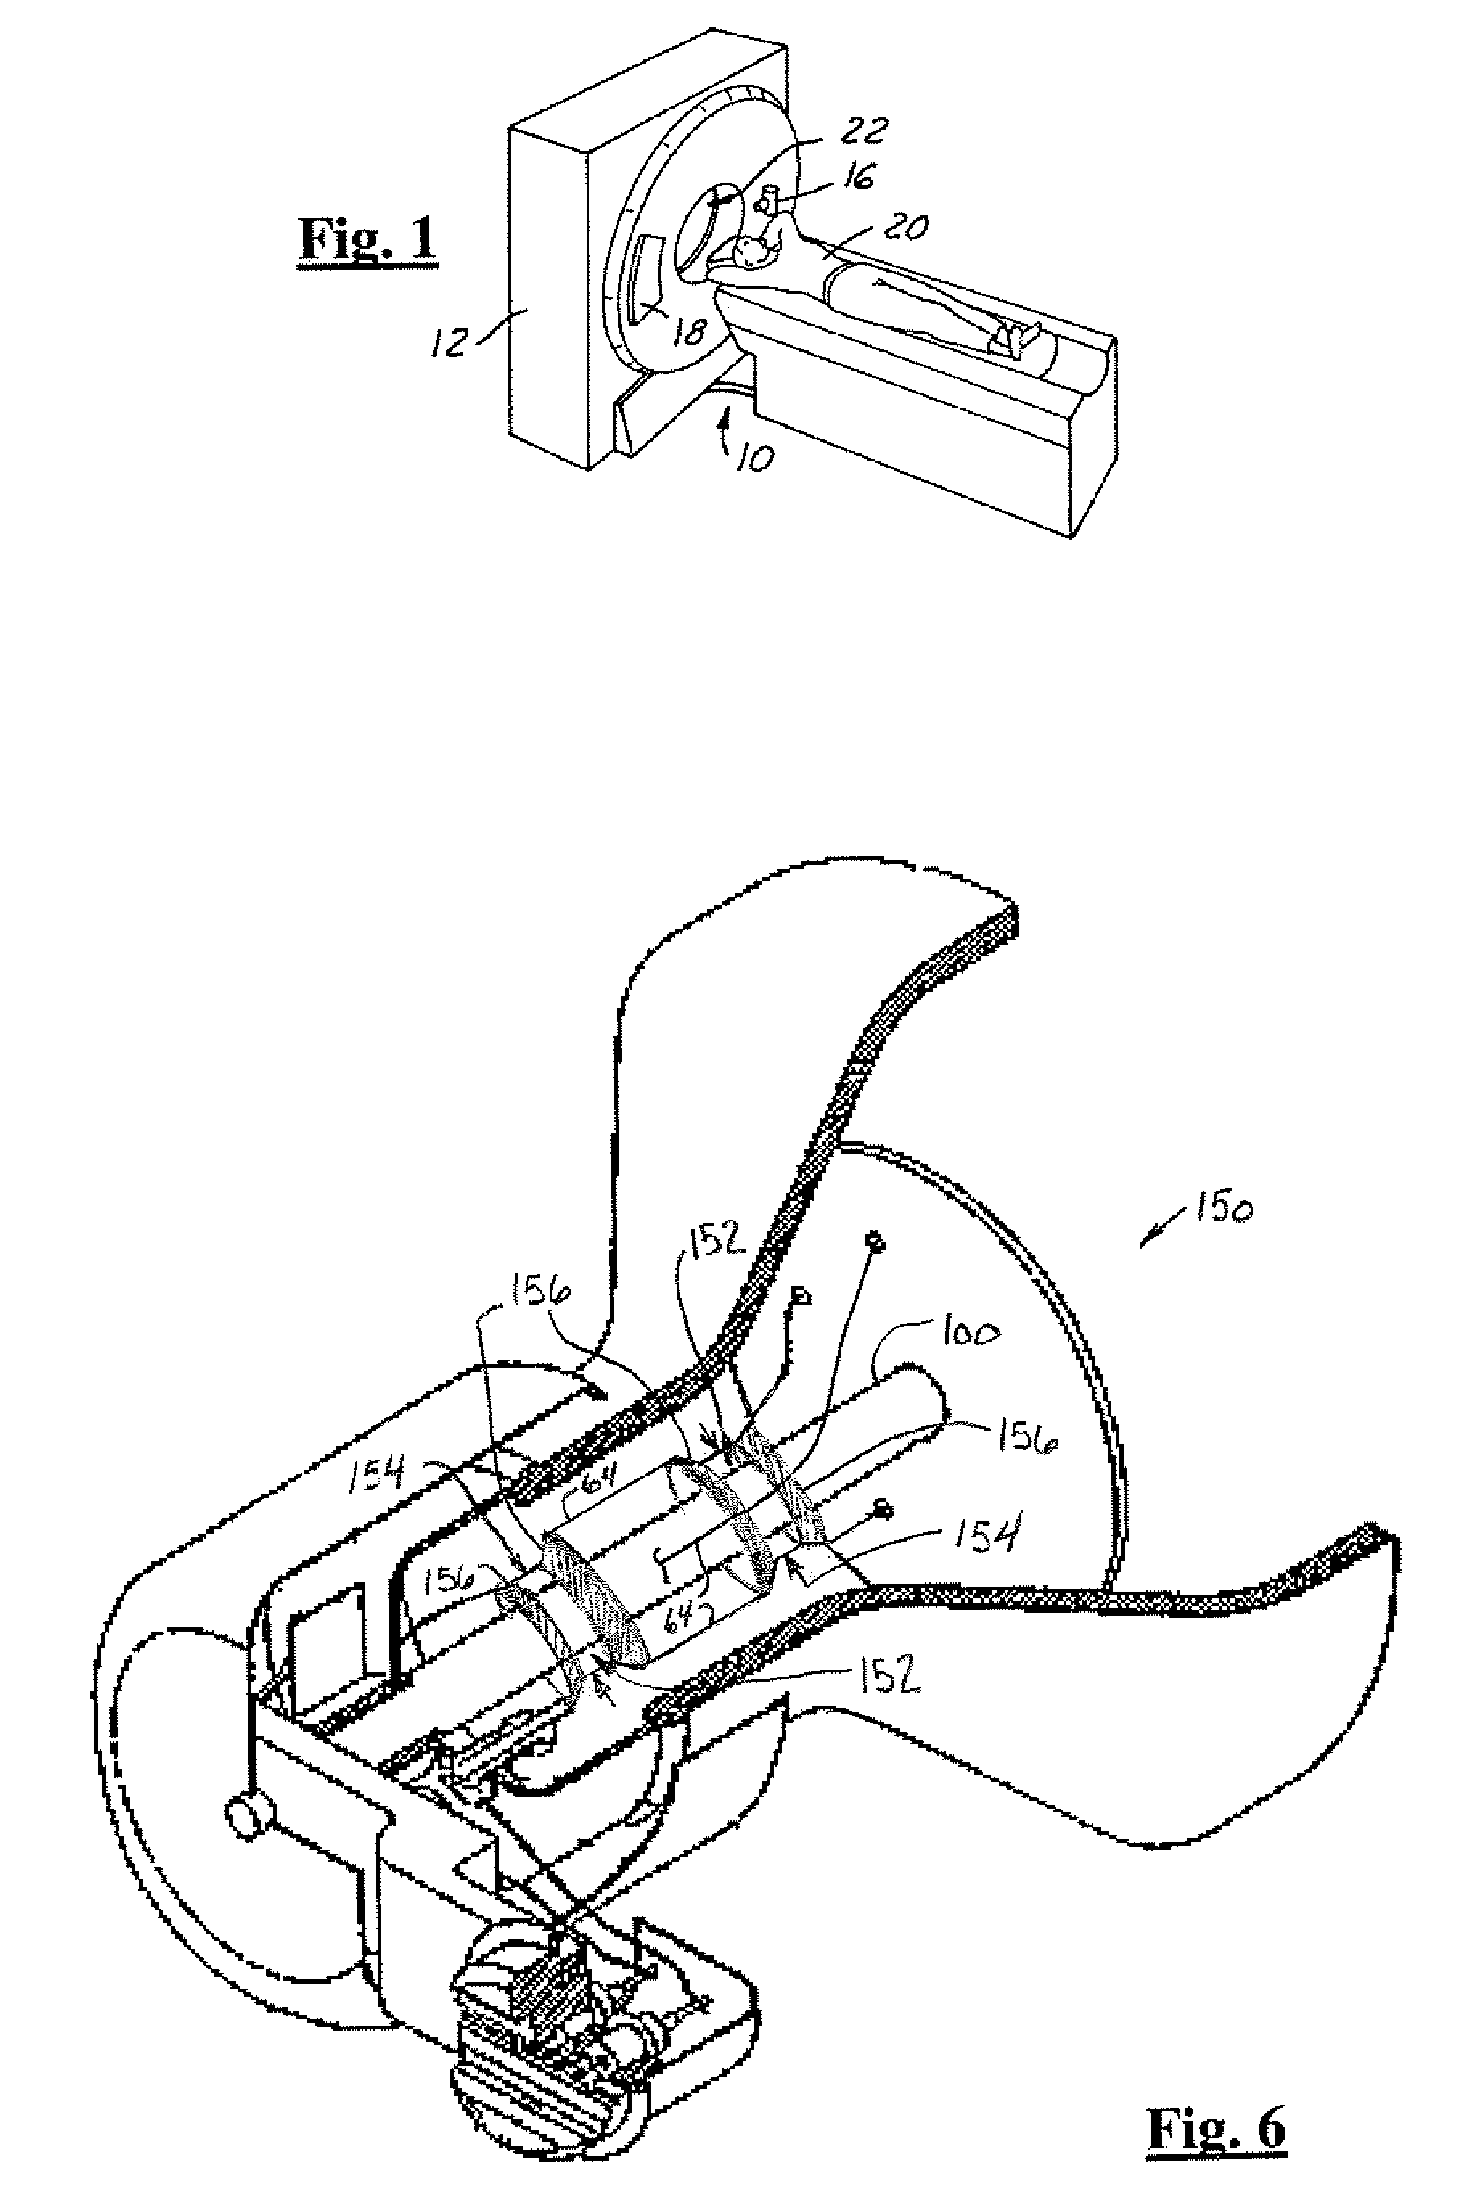 X-ray tube cathode overvoltage transient supression apparatus